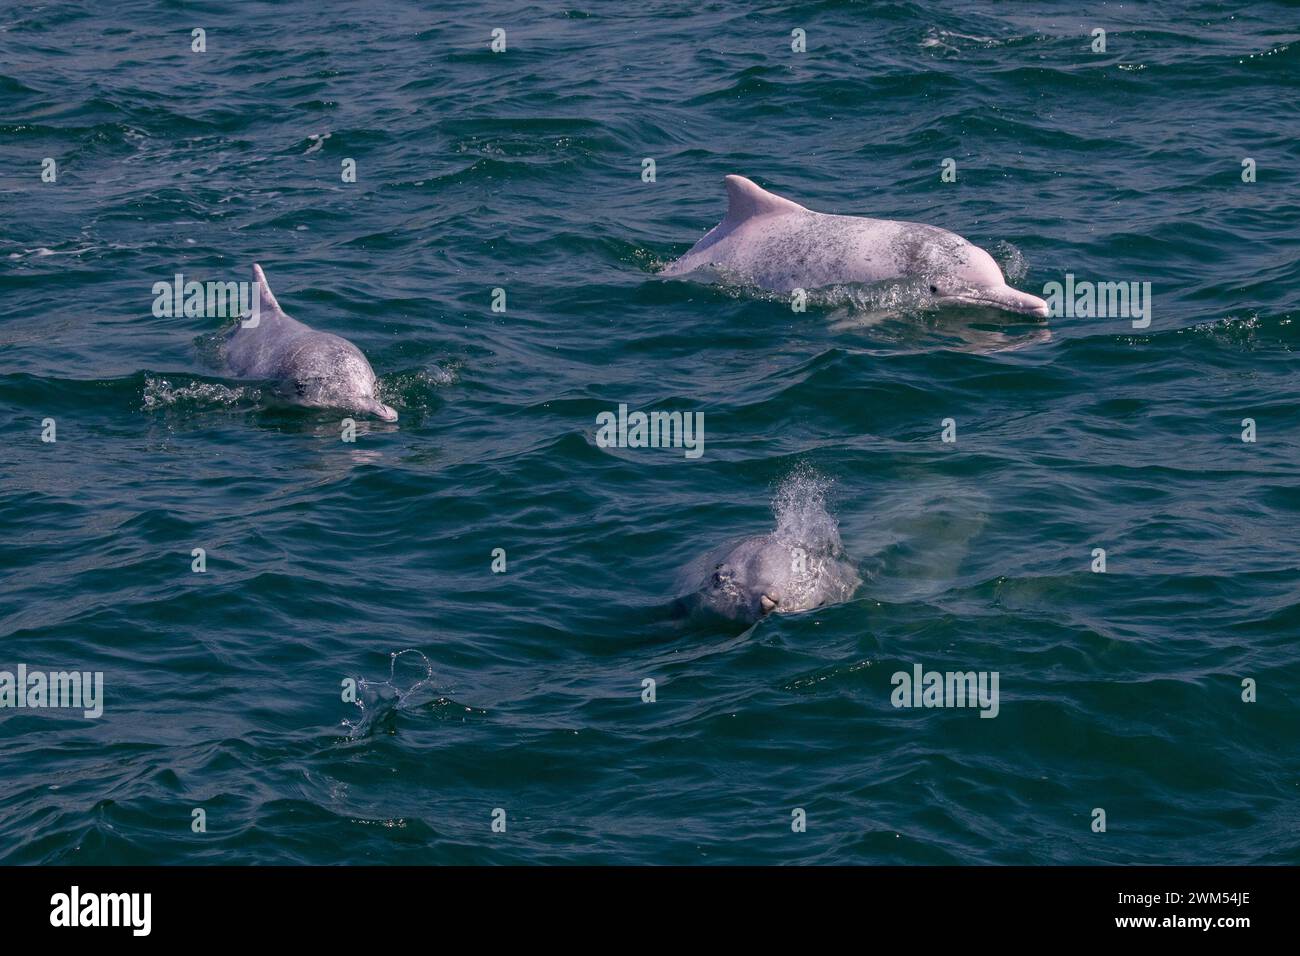 Indo-Pacific Humpback Dolphin / Chinese White Dolphin / Pink Dolphin (Sousa Chinensis) pod in the waters of Hong Kong Stock Photo